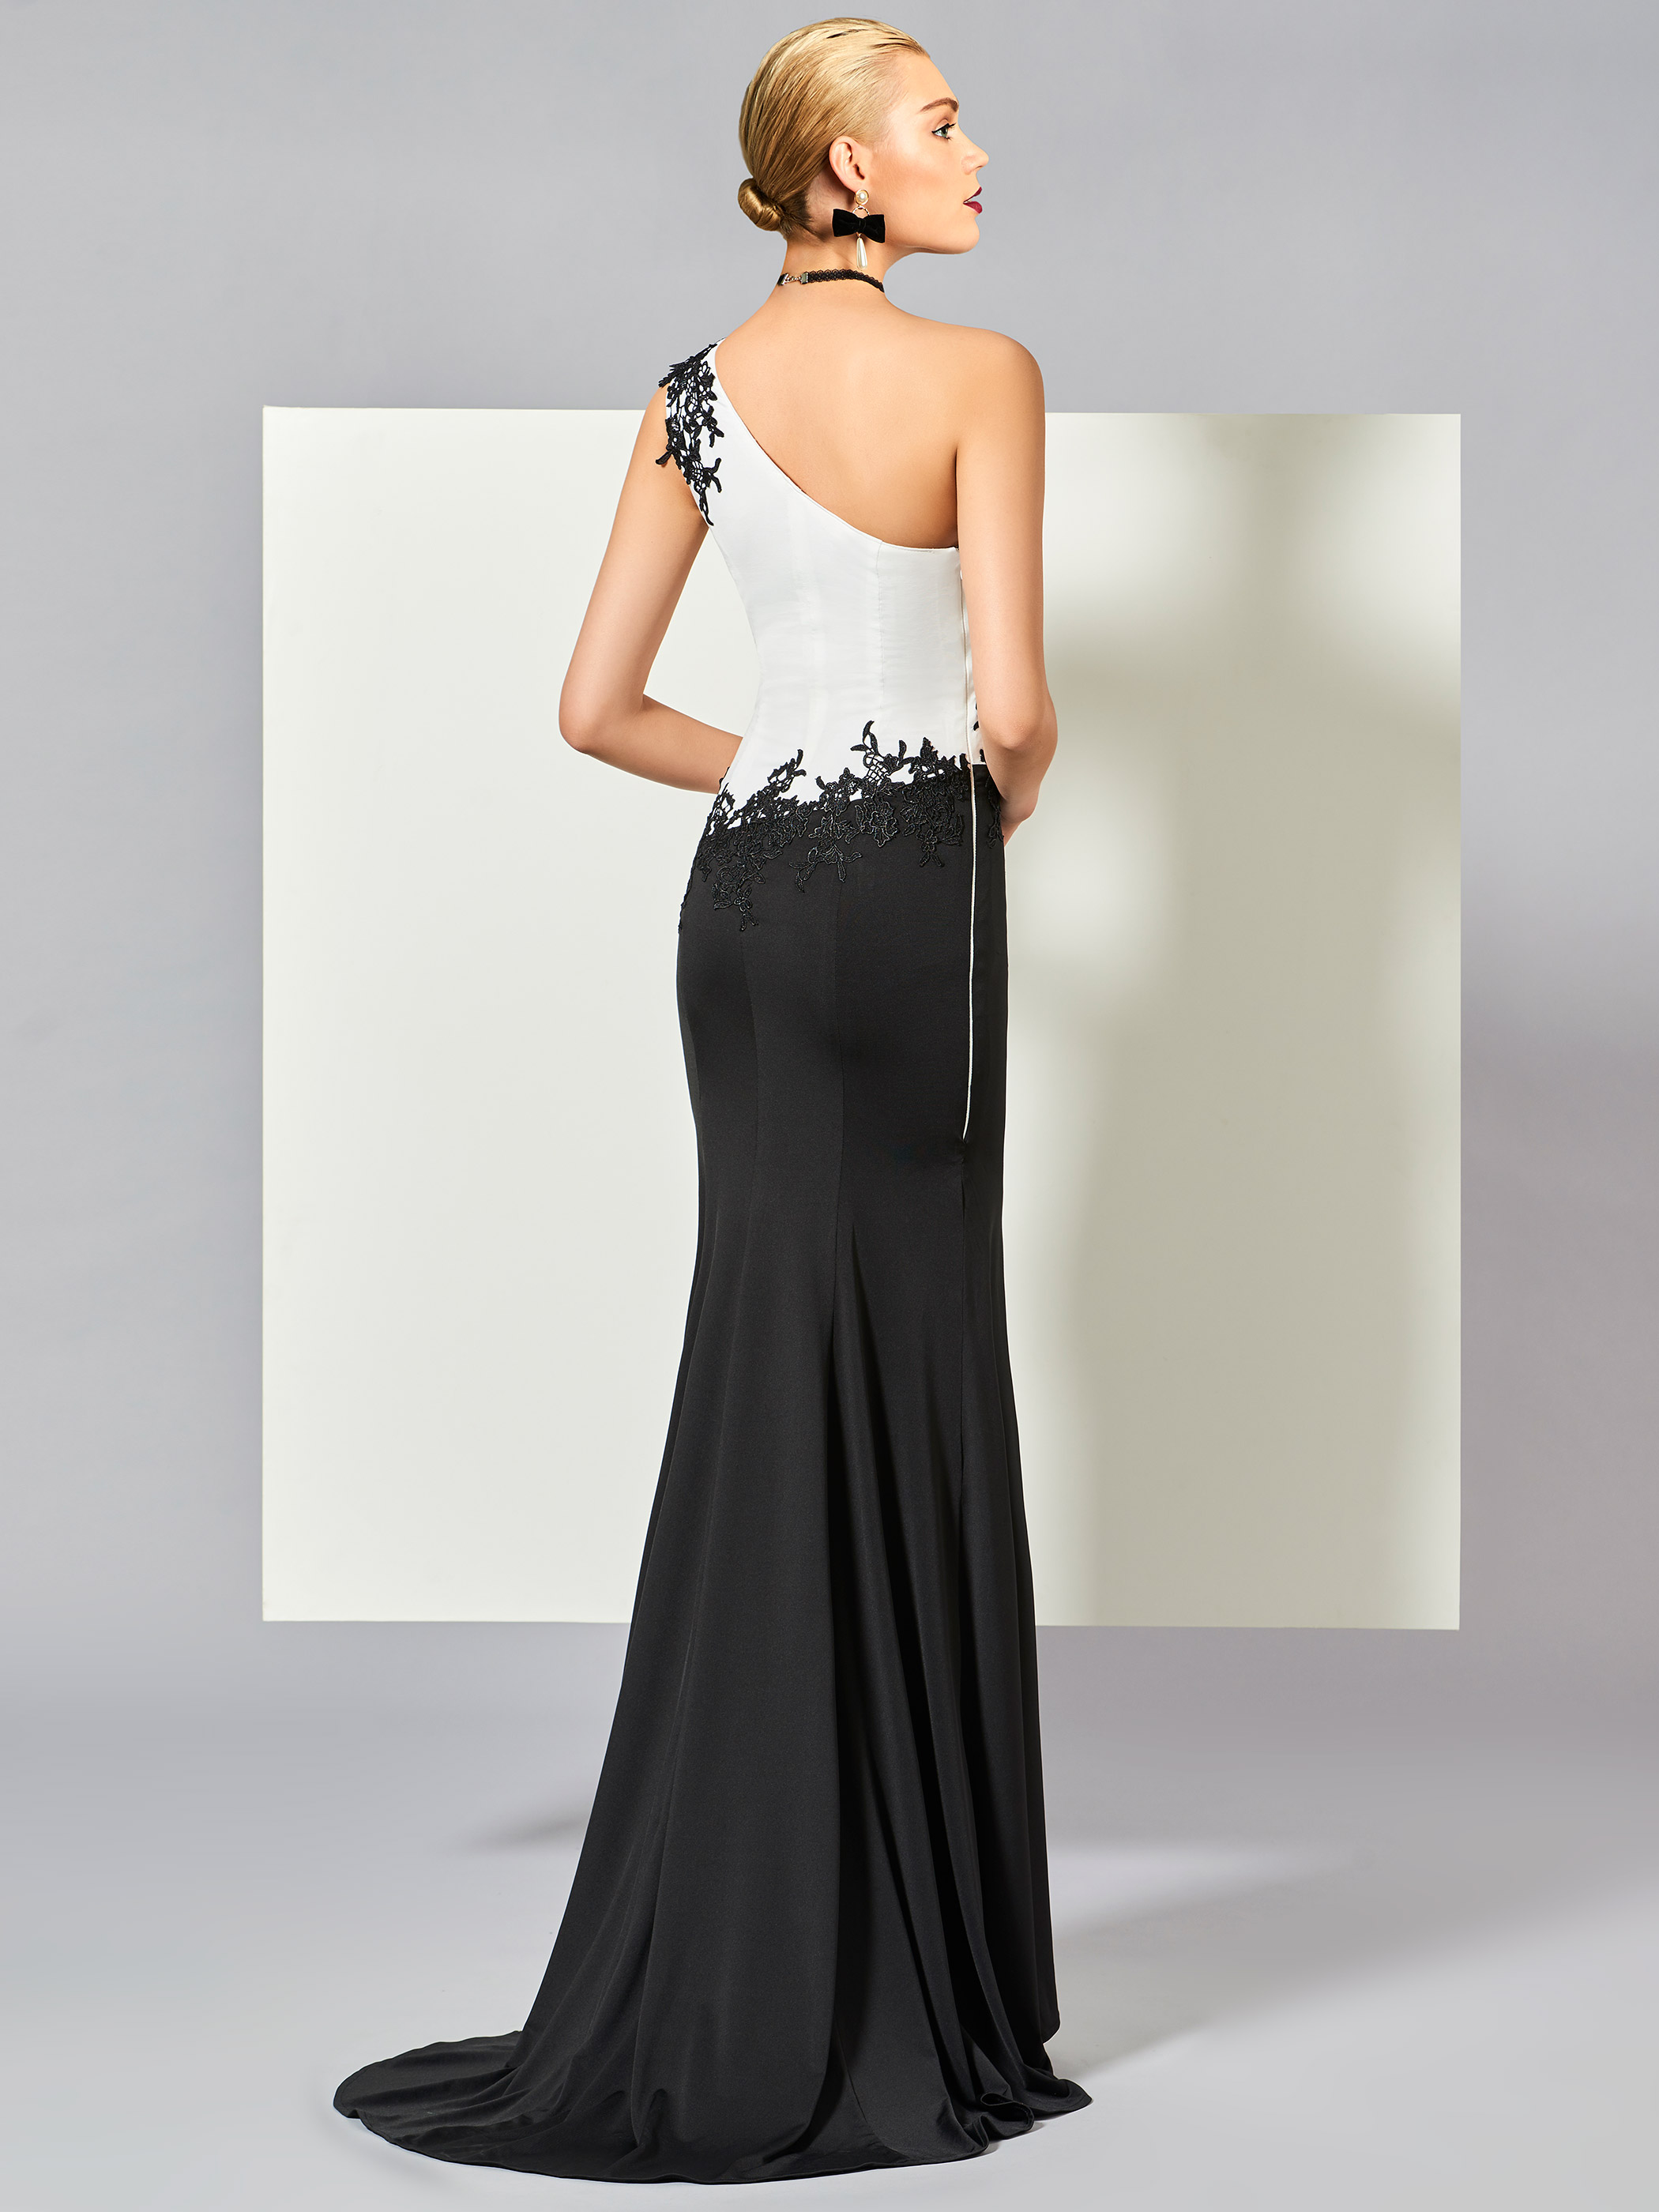 Ericdress Sheath One Shoulder Applique Evening Dress With Sweep Train